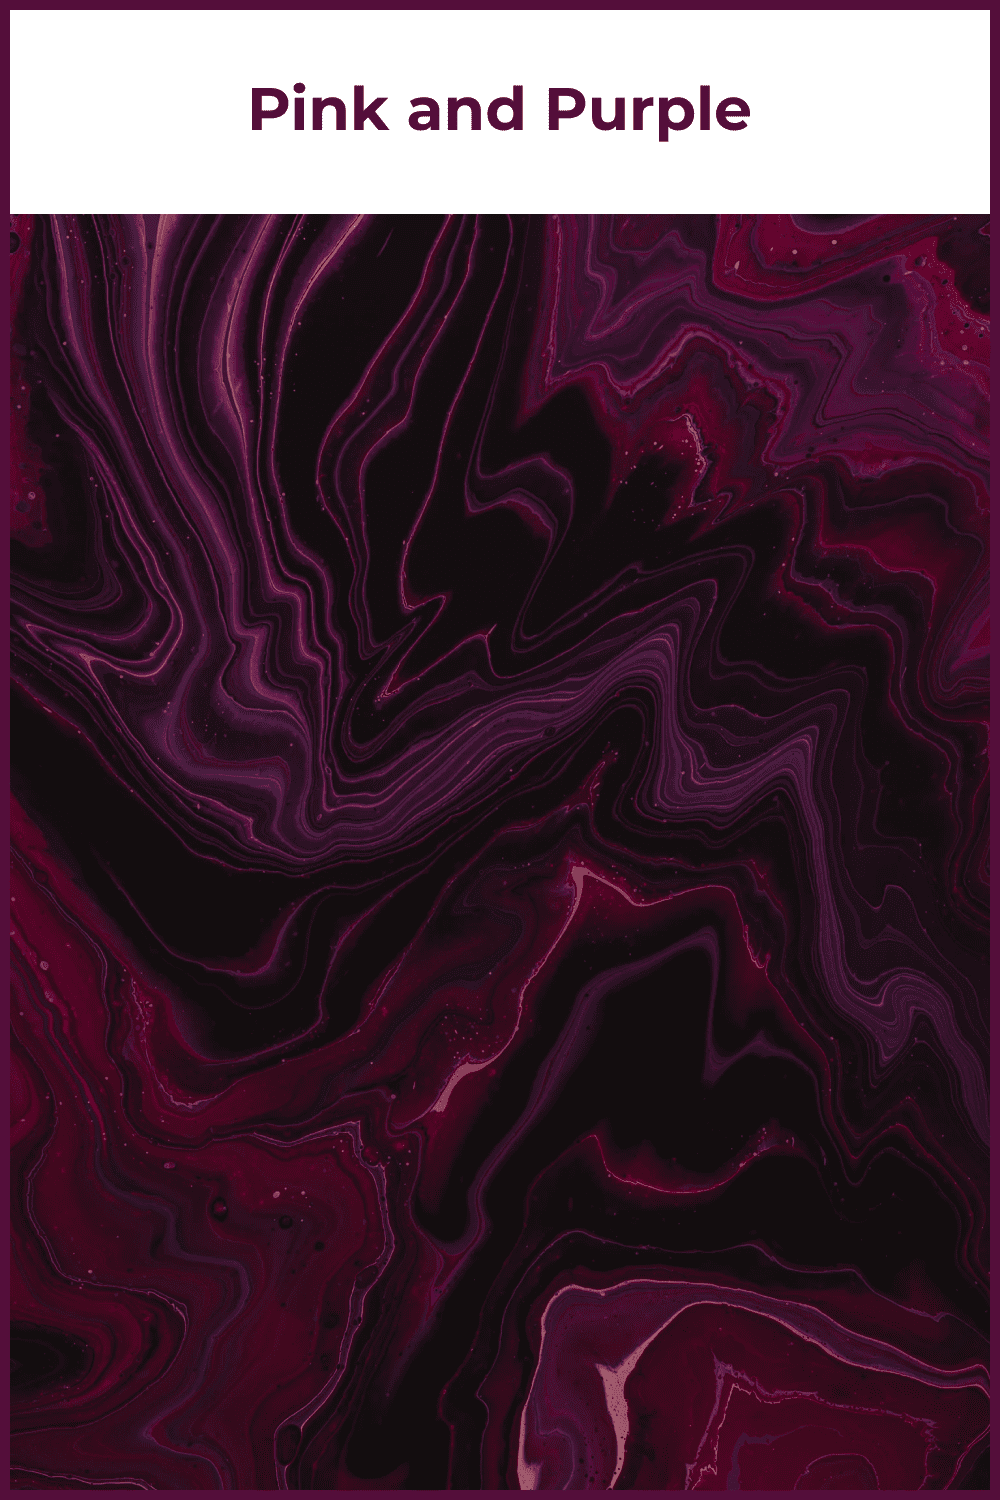 Black background with delicate purple lines.